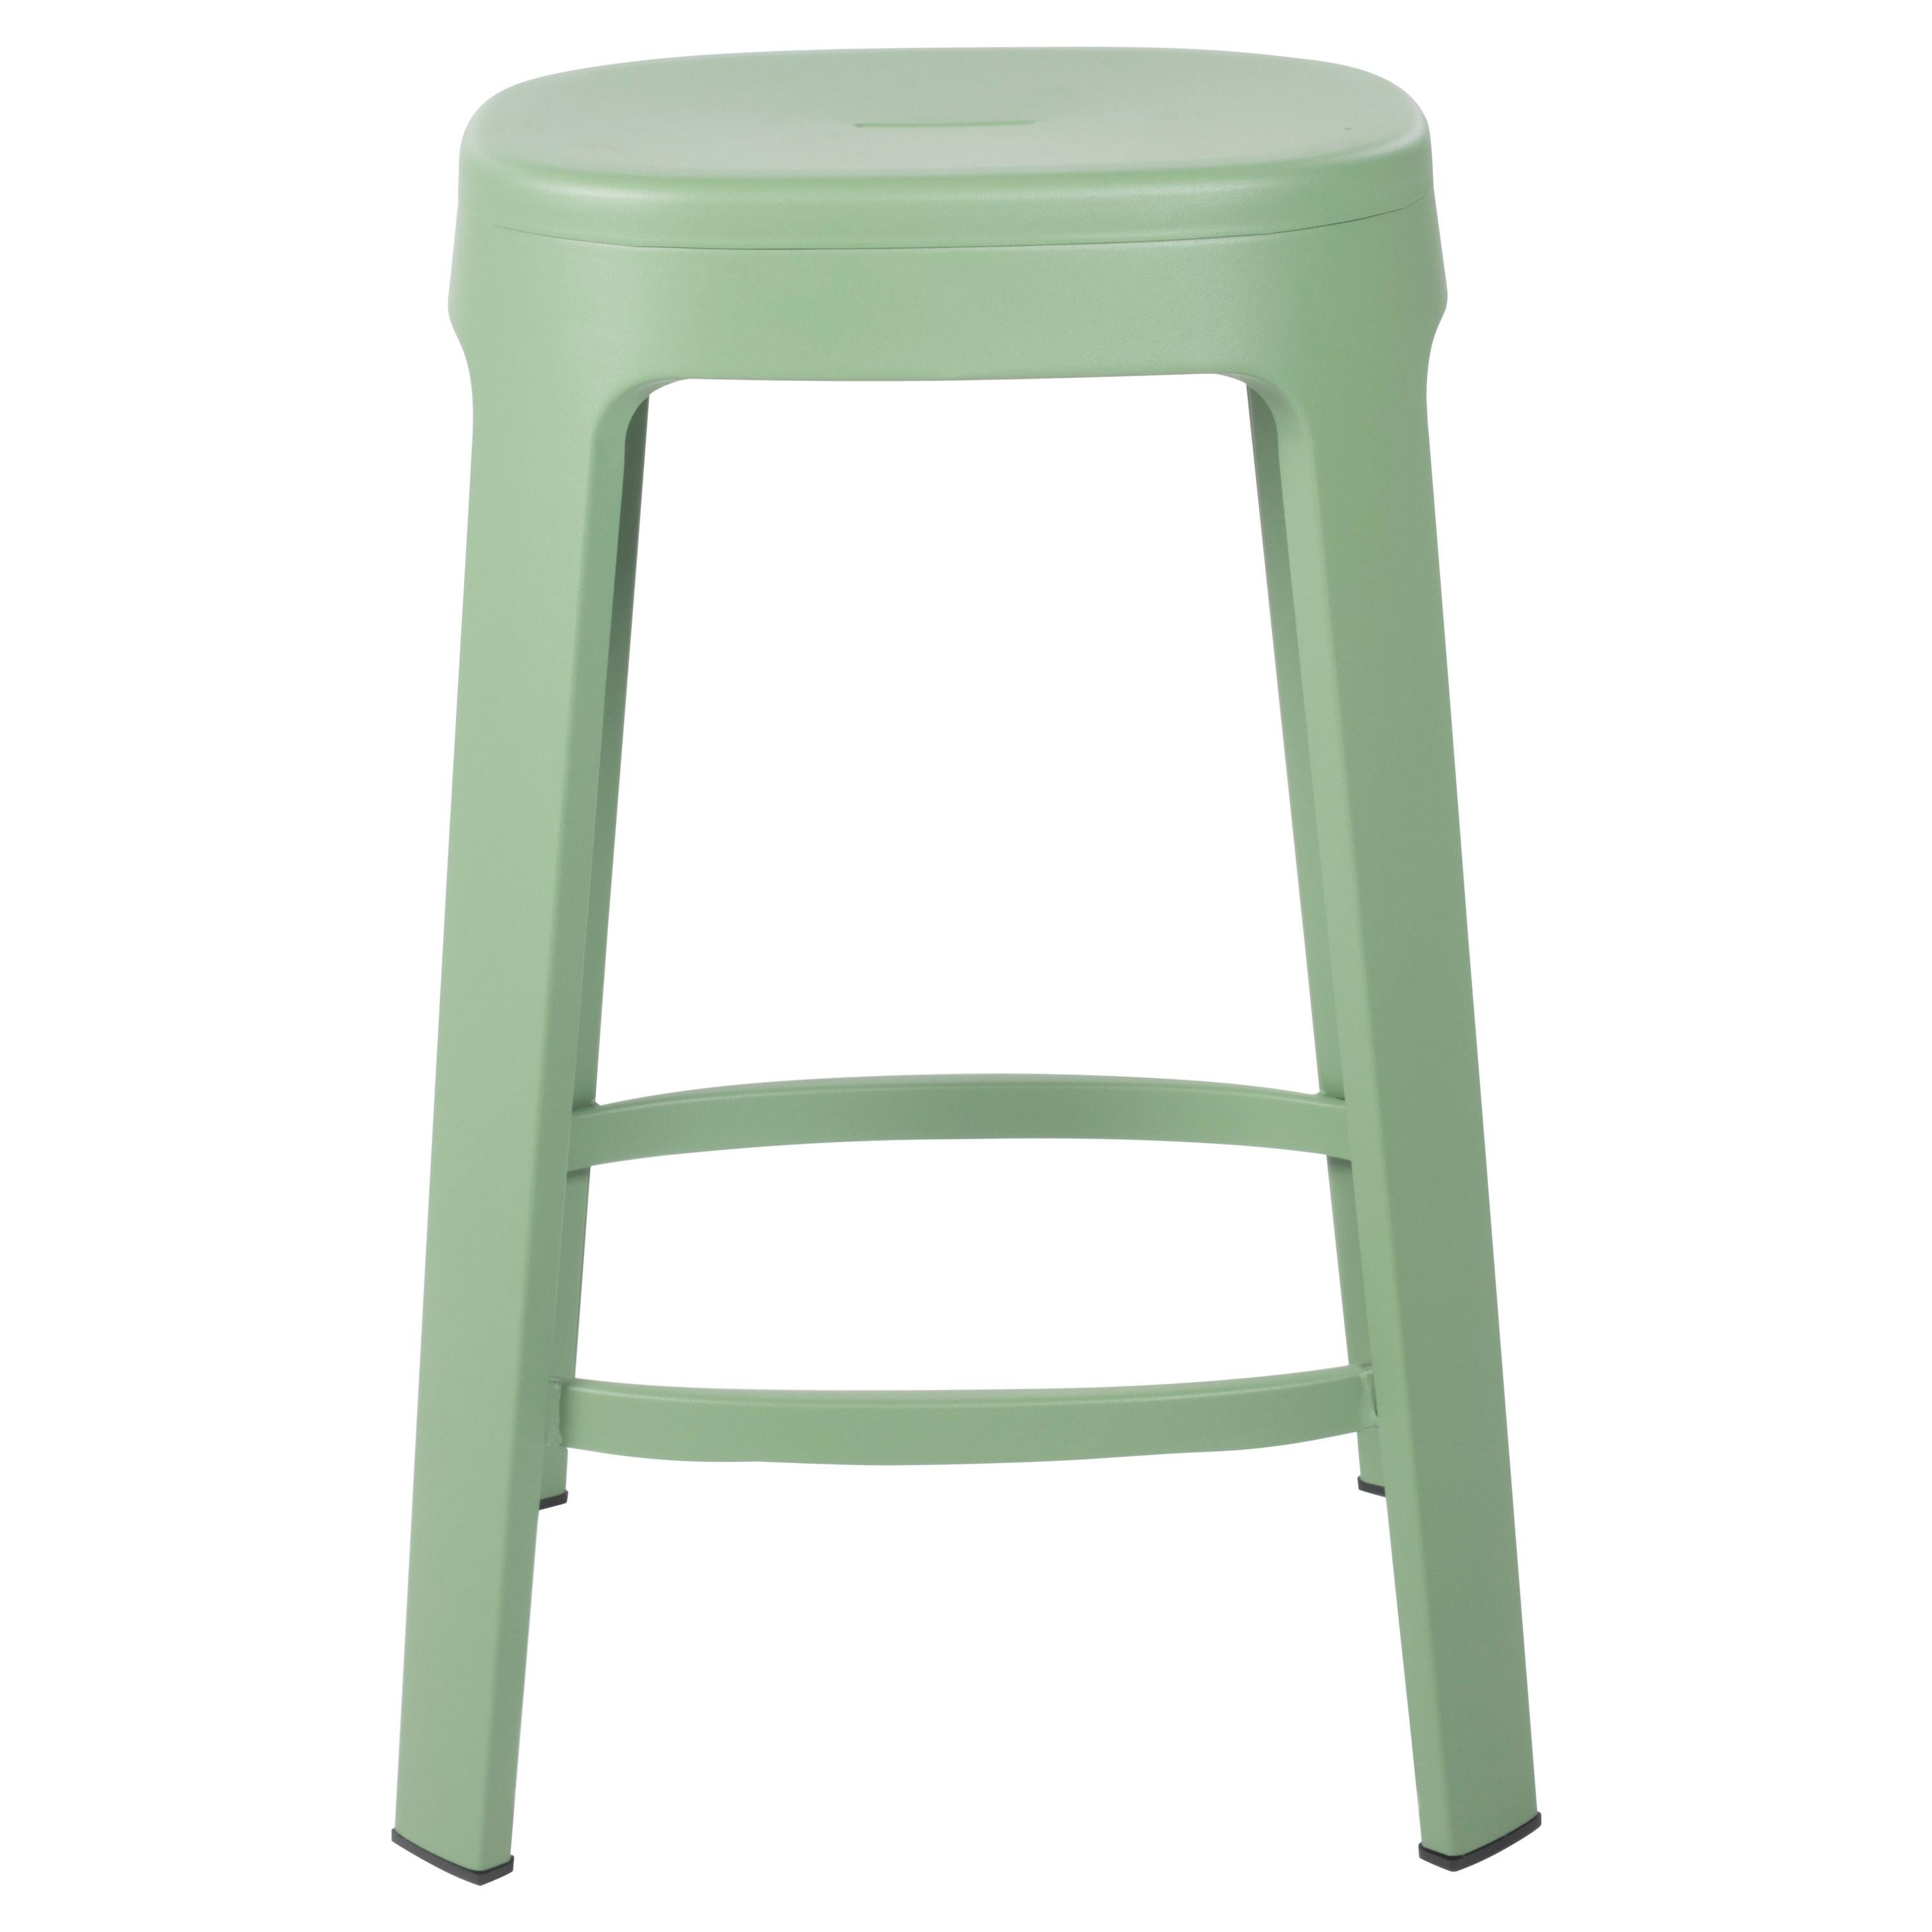 Ombra Counter Stool., Green by Emiliana Design Studio For Sale